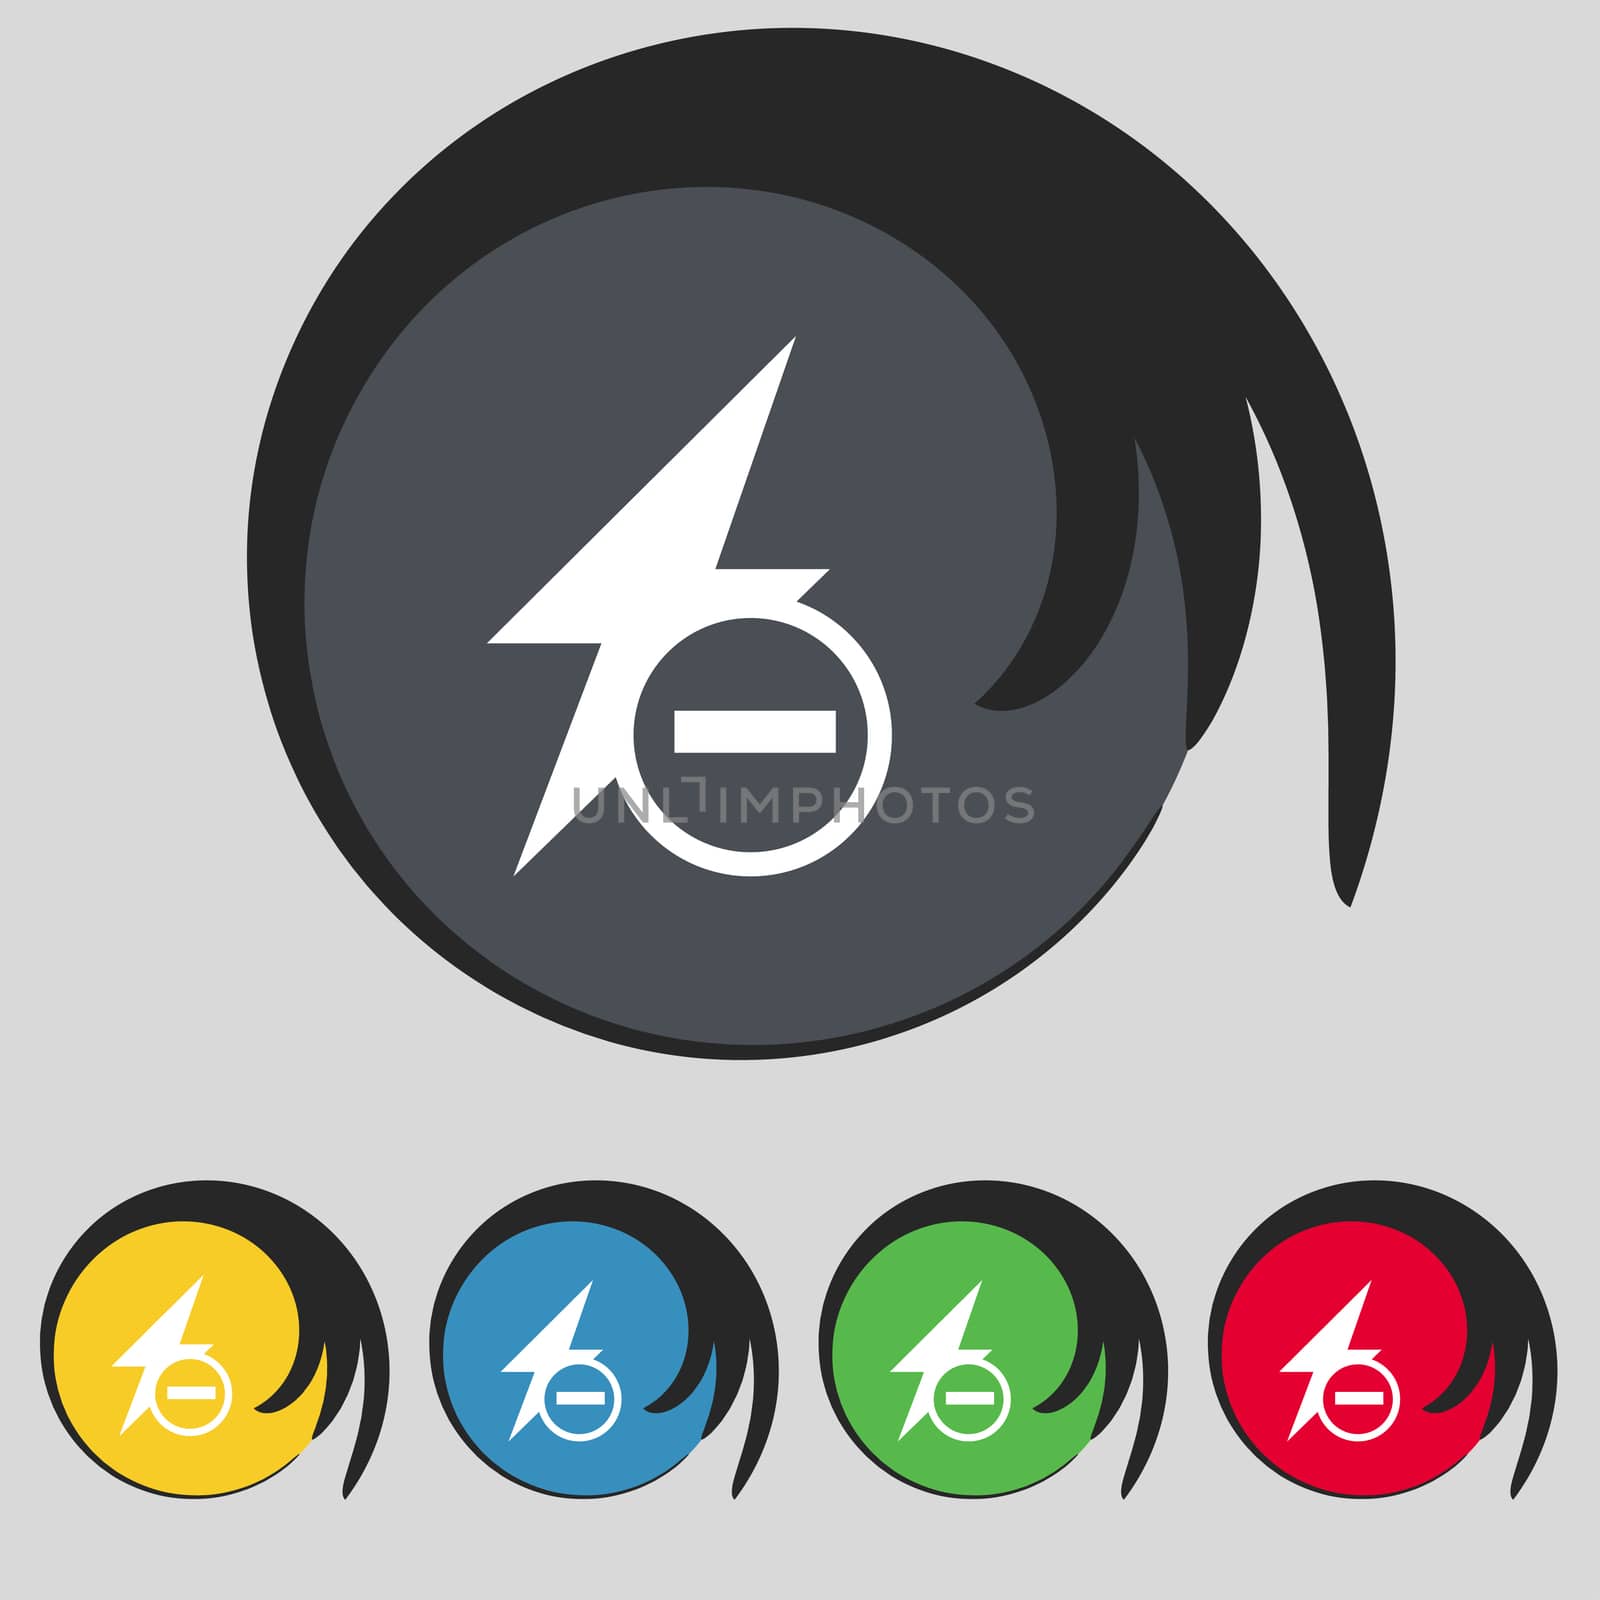 Photo flash icon sign. Symbol on five colored buttons. illustration